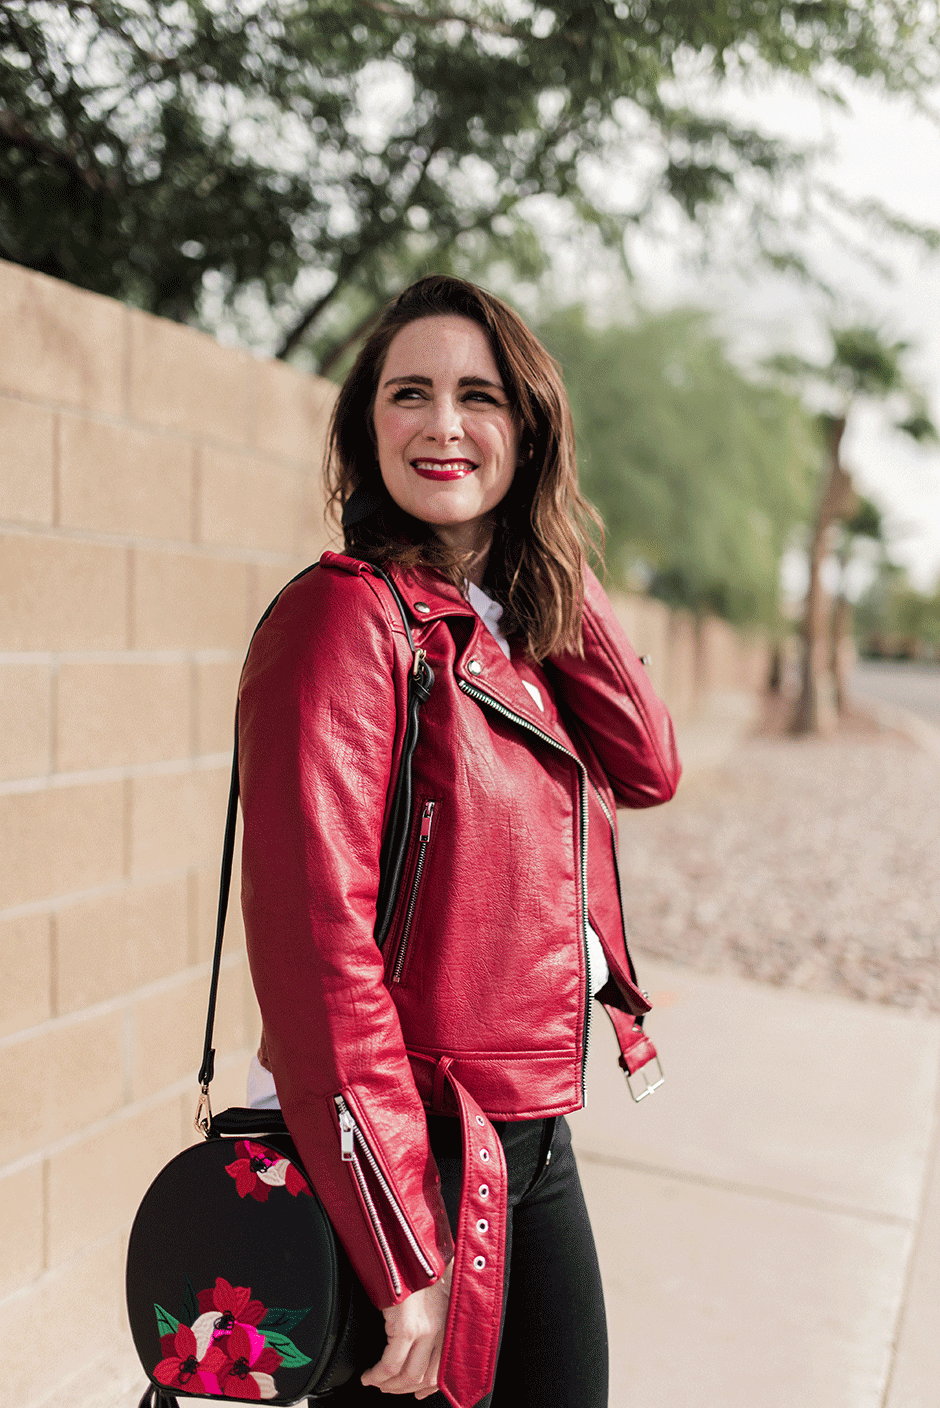 Ever stumped on what to choose for a casual get together with friends? This tough-girl look is the perfect party outfit inspiration. Womens fashion doesn't have to be hard - a leather jacket, jeans and heels do the trick!